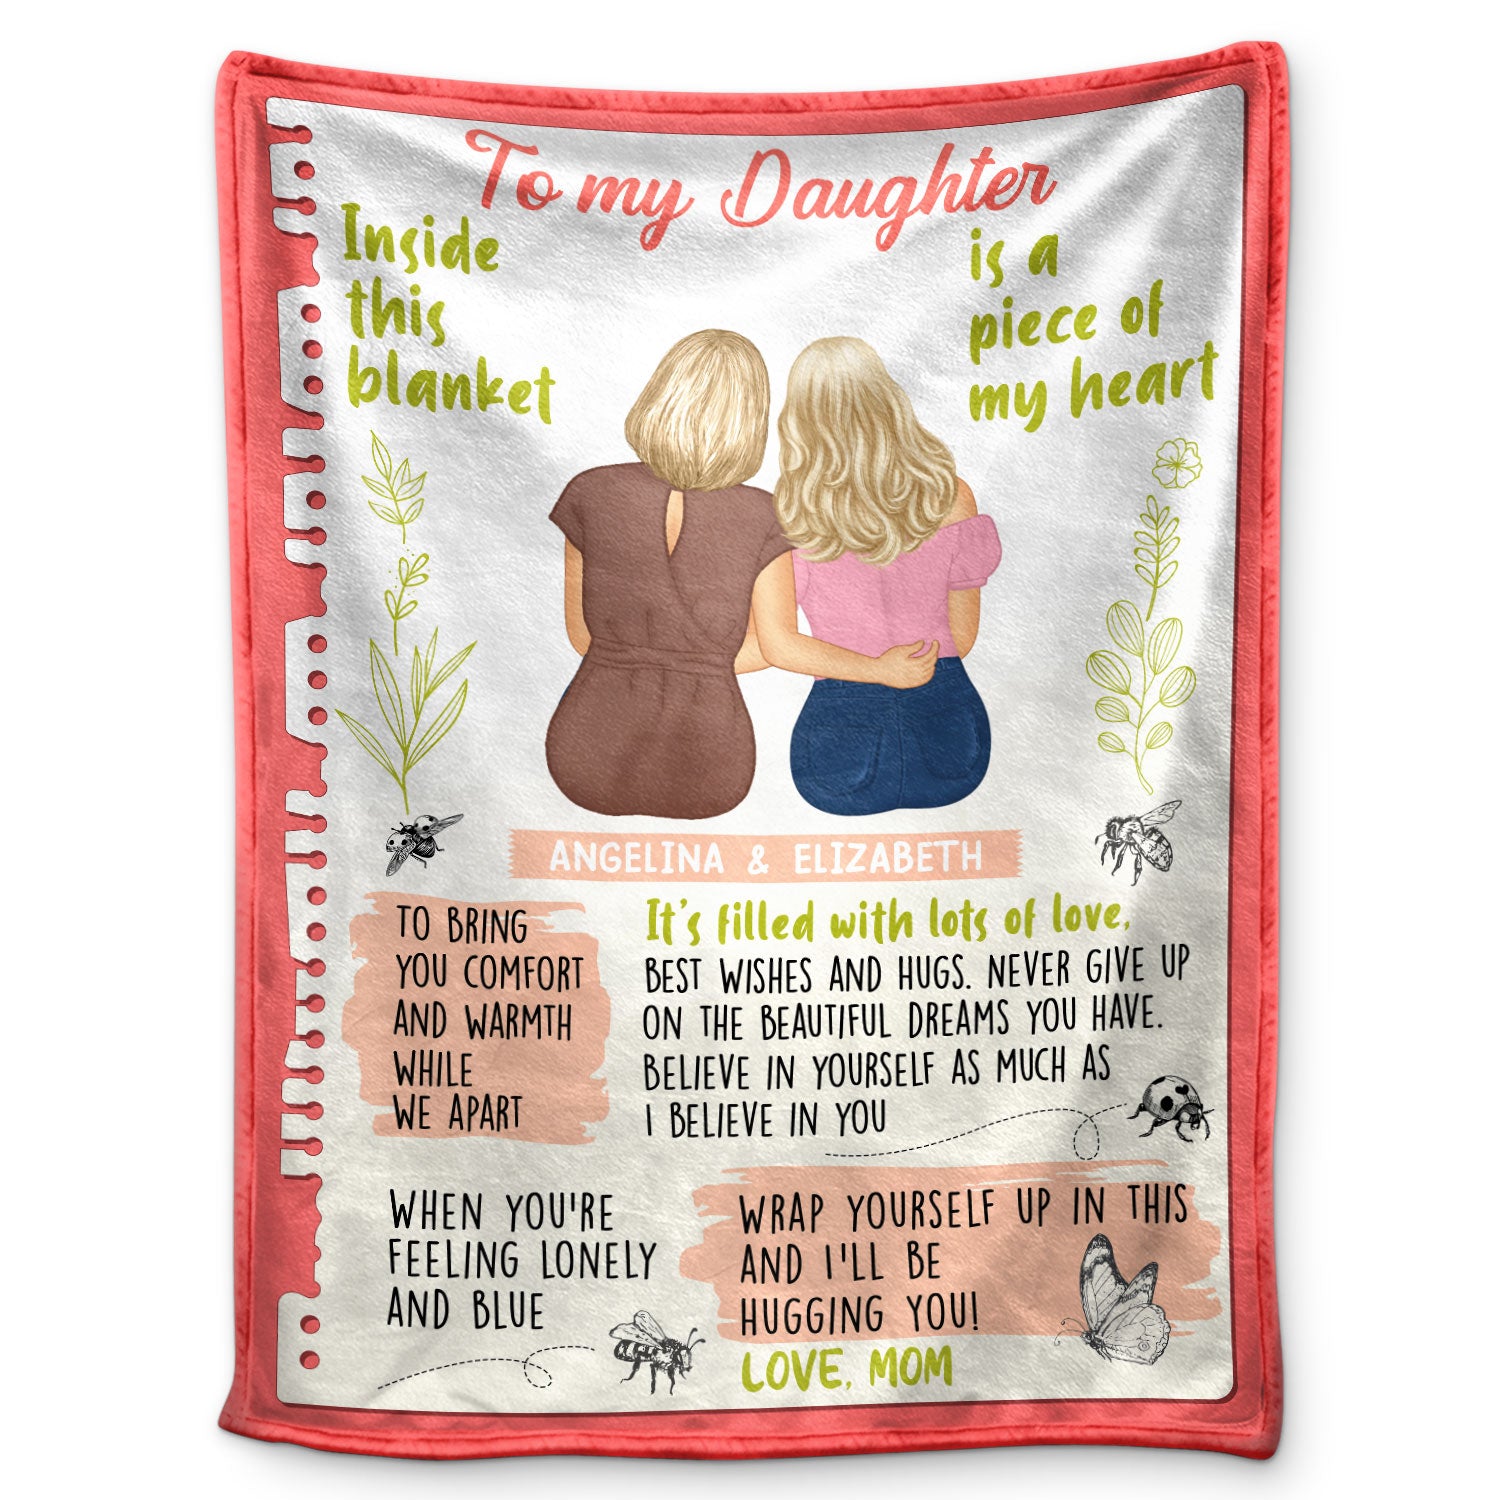 Inside This Blanket Is A Piece Of My Heart - Birthday, Loving Gift For Mother, Daughter, Aunt, Niece - Personalized Fleece Blanket